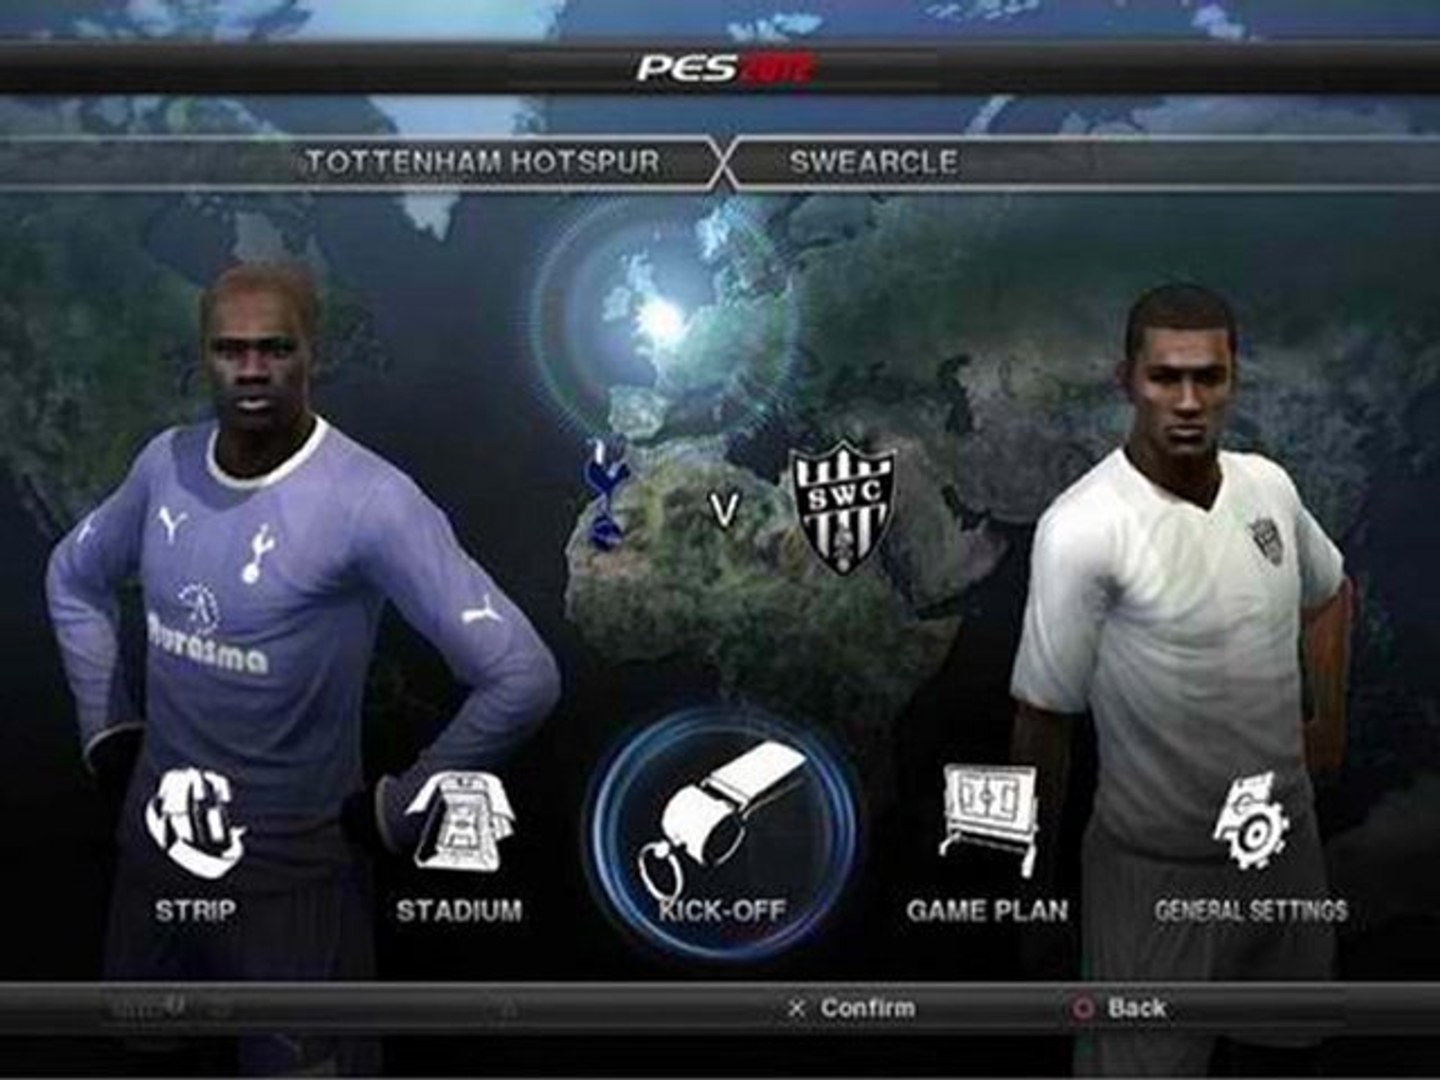 PES 2012 PPSSPP for Android Download